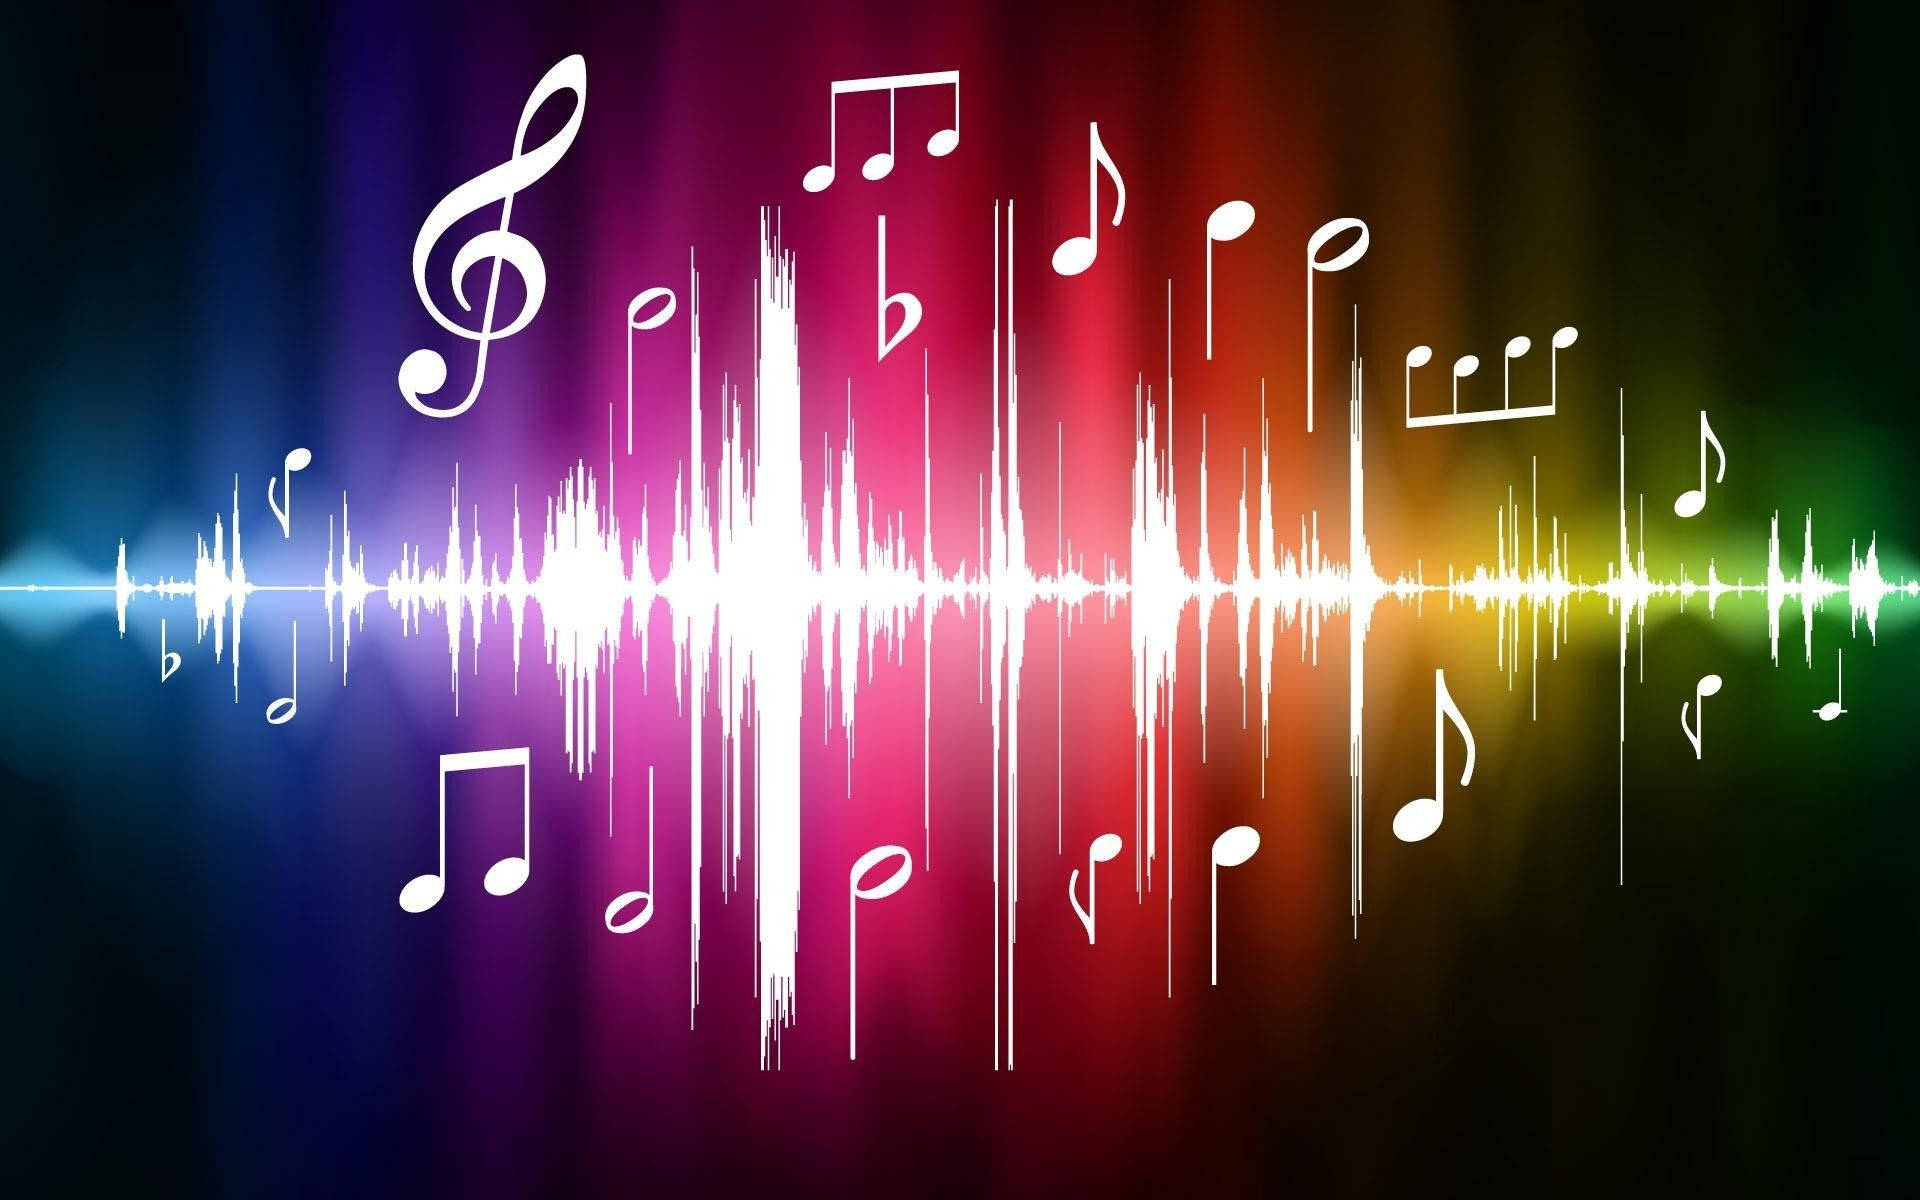 Share more than 160 music photo wallpaper latest